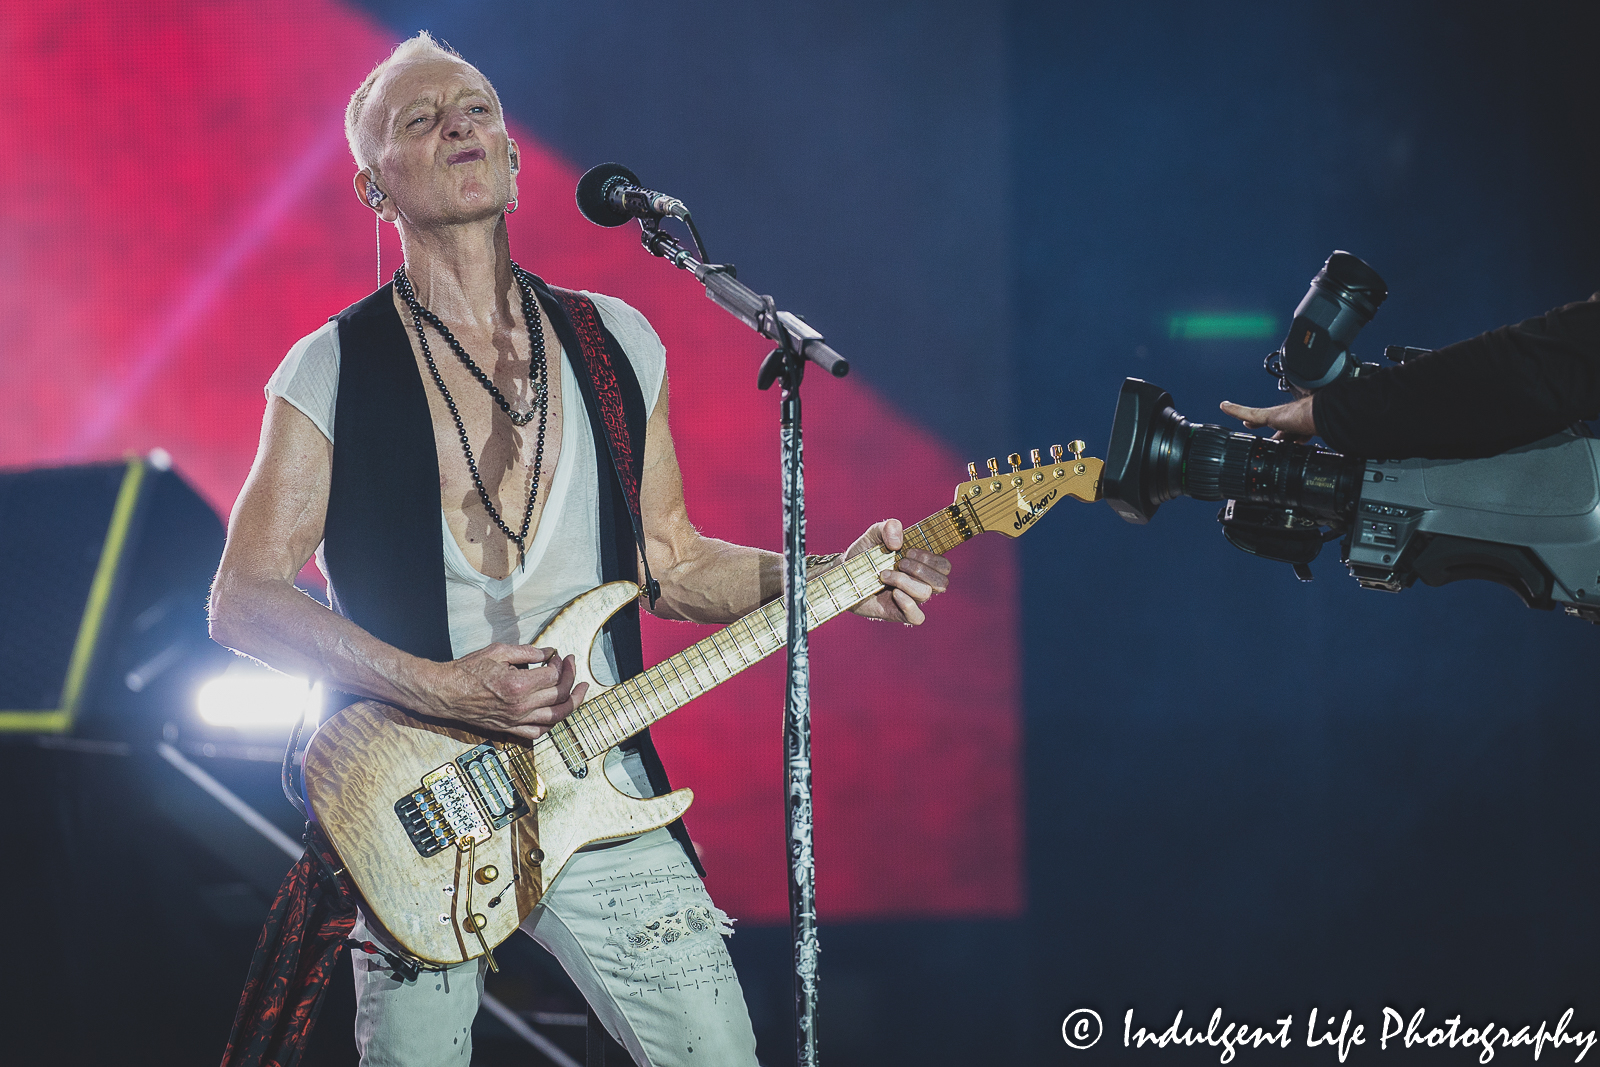 Guitarist Phil Collen performing live during the stadium tour concert at Kauffman Stadium in Kansas City, MO on July 19, 2022.